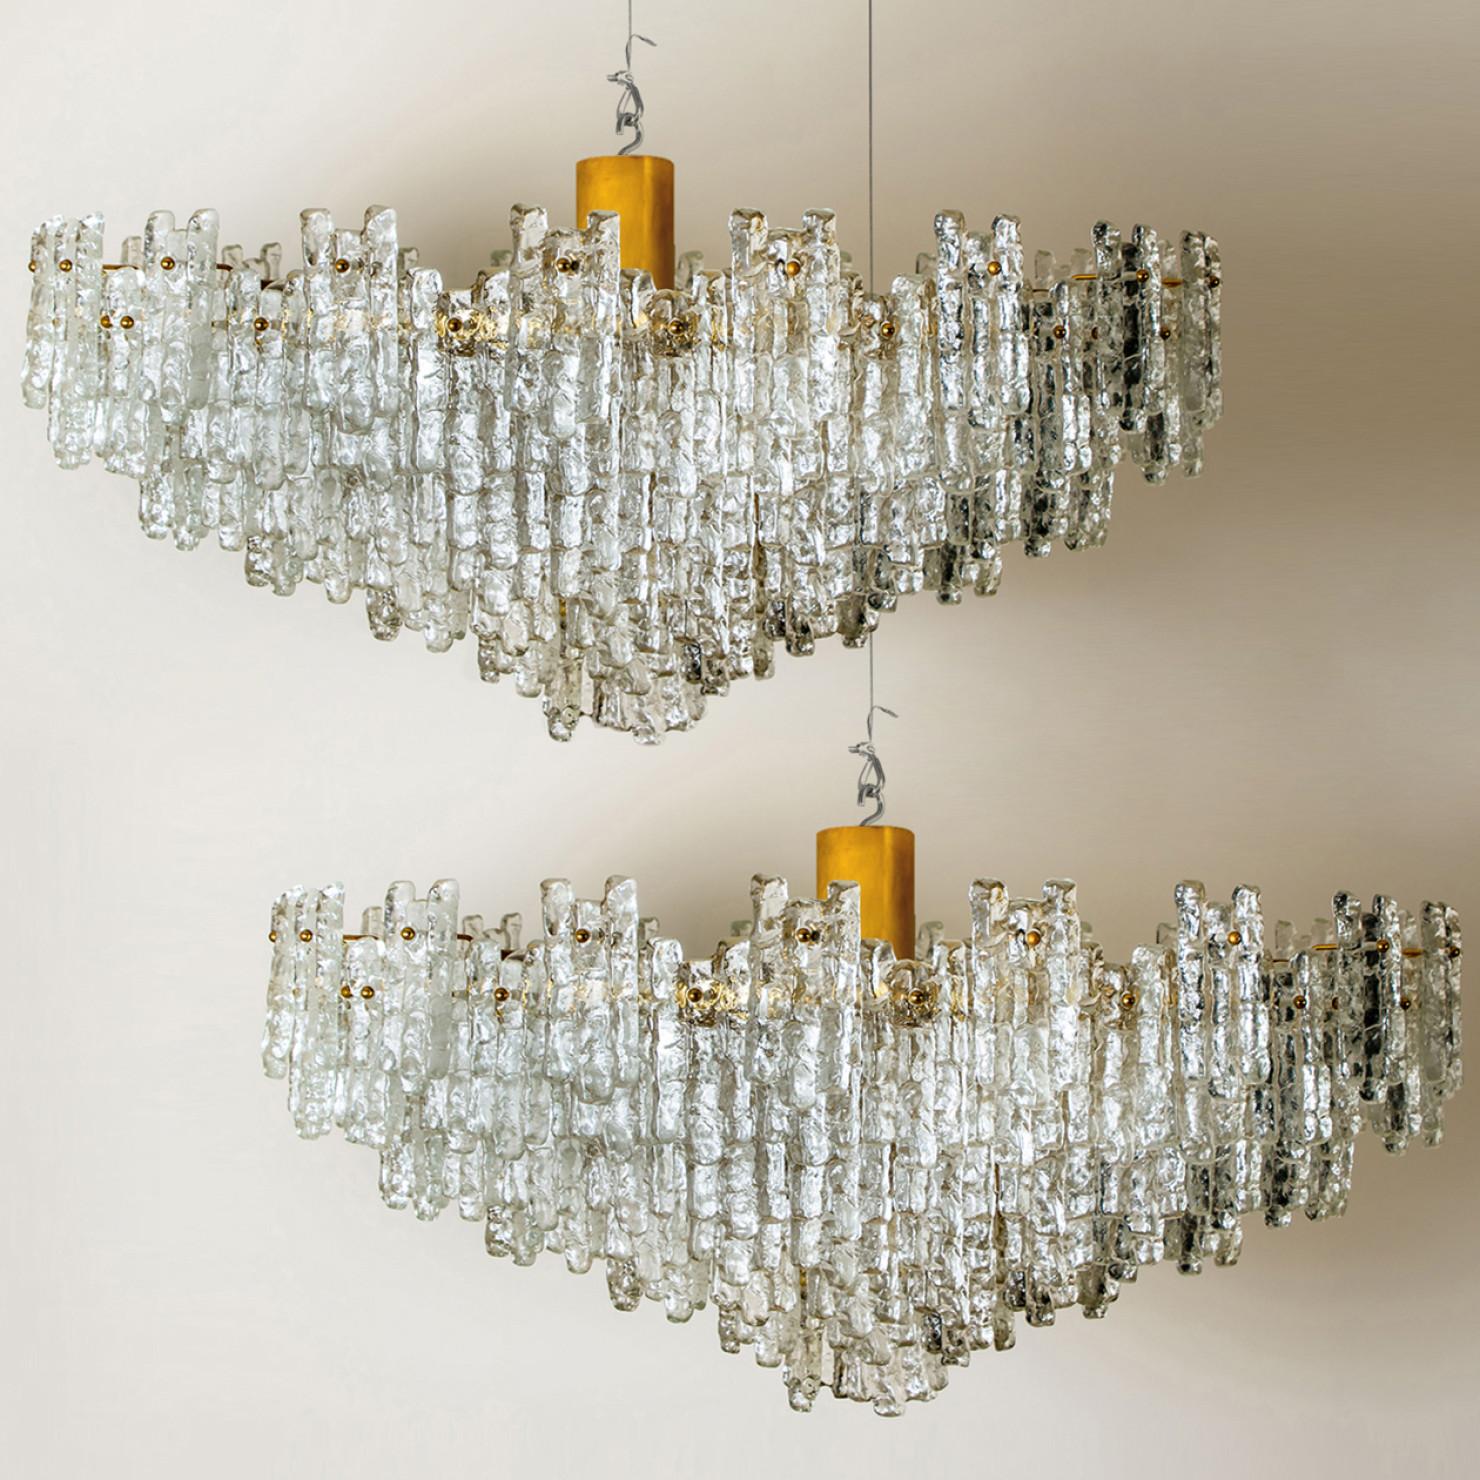 1 of the 2 exceptional, huge, clean and modern six-tier ballroom flush mount chandelier by J.T. Kalmar Leuchten from the 1960s. The chandelier consists six layers with a 141 hand blown textured glass shades mounted on a brass frame arranged in